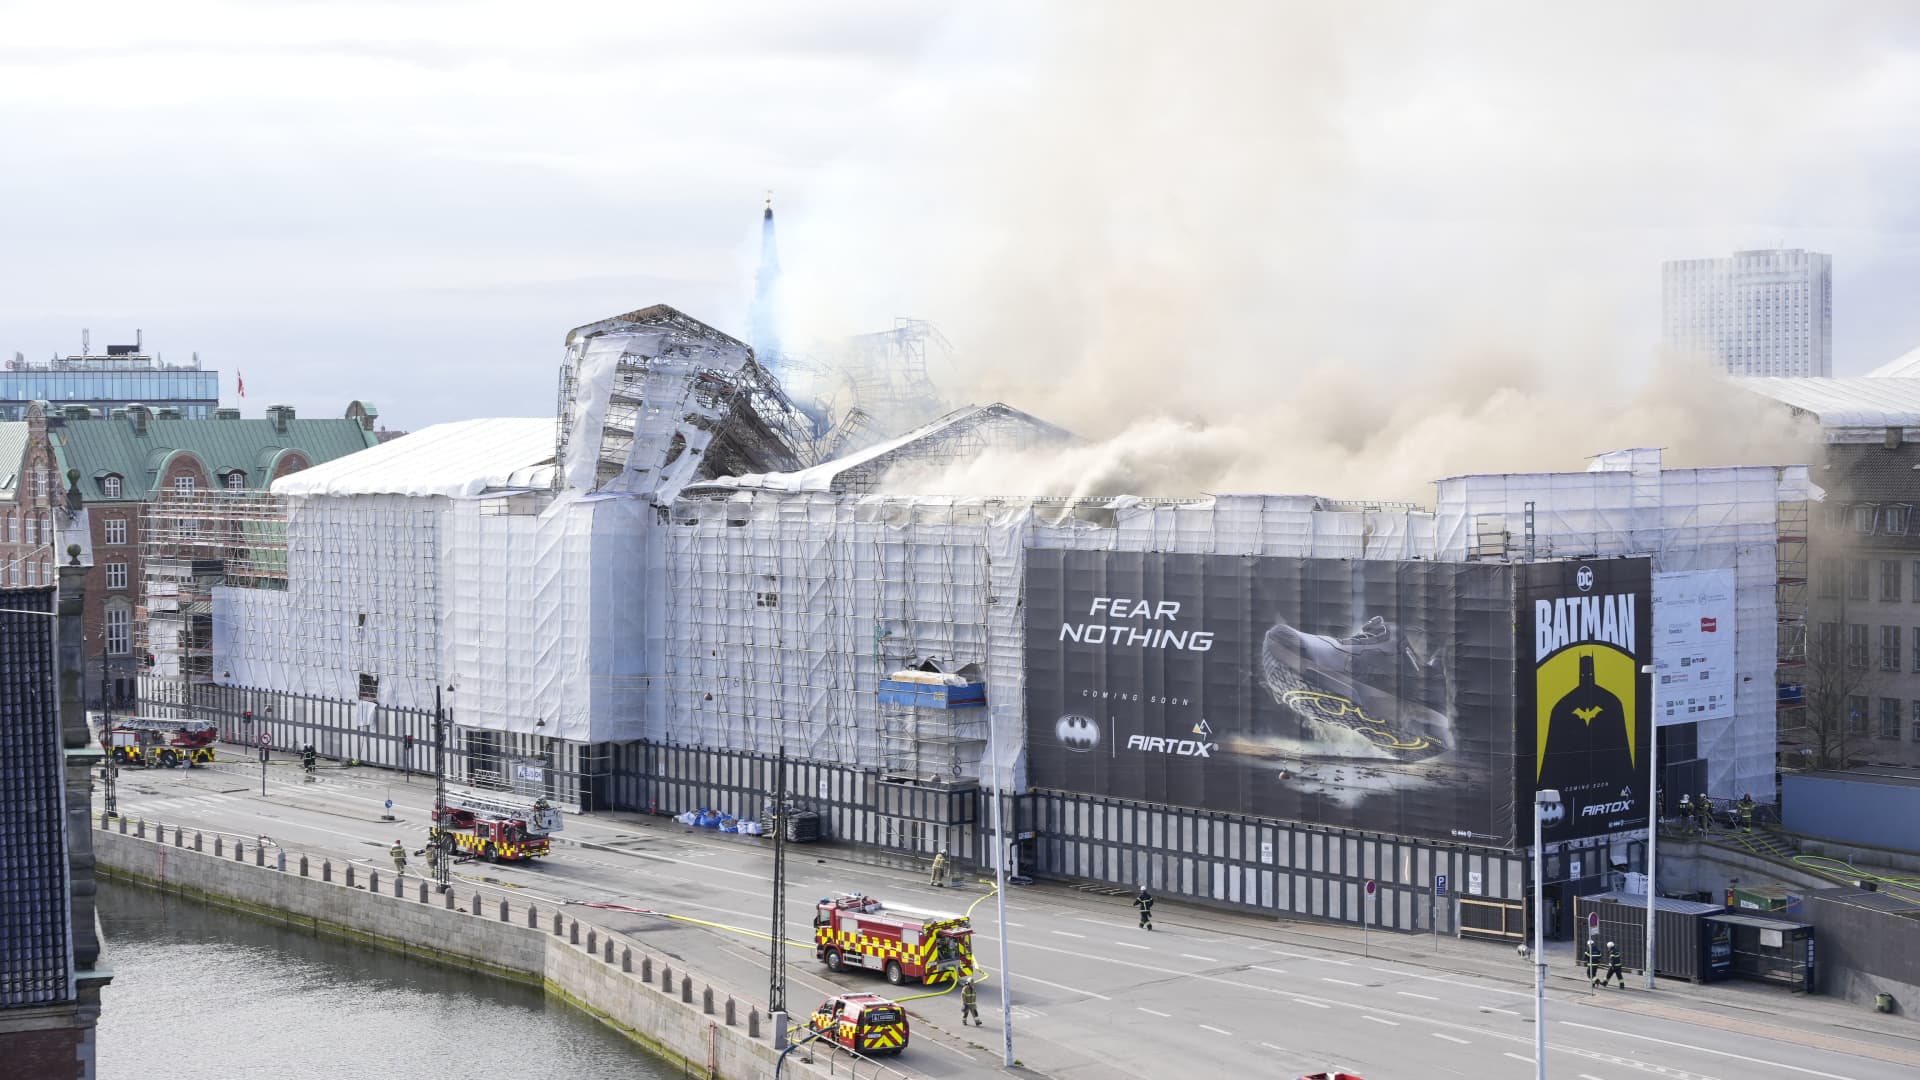 Plumes of smoke billow from the historic Boersen stock exchange building which is on fire in central Copenhagen, Denmark on April 16, 2024. The building, one of the oldest in the Danish capital, was undergoing renovation work when in the morning it caught fire, whose cause was yet unknown.